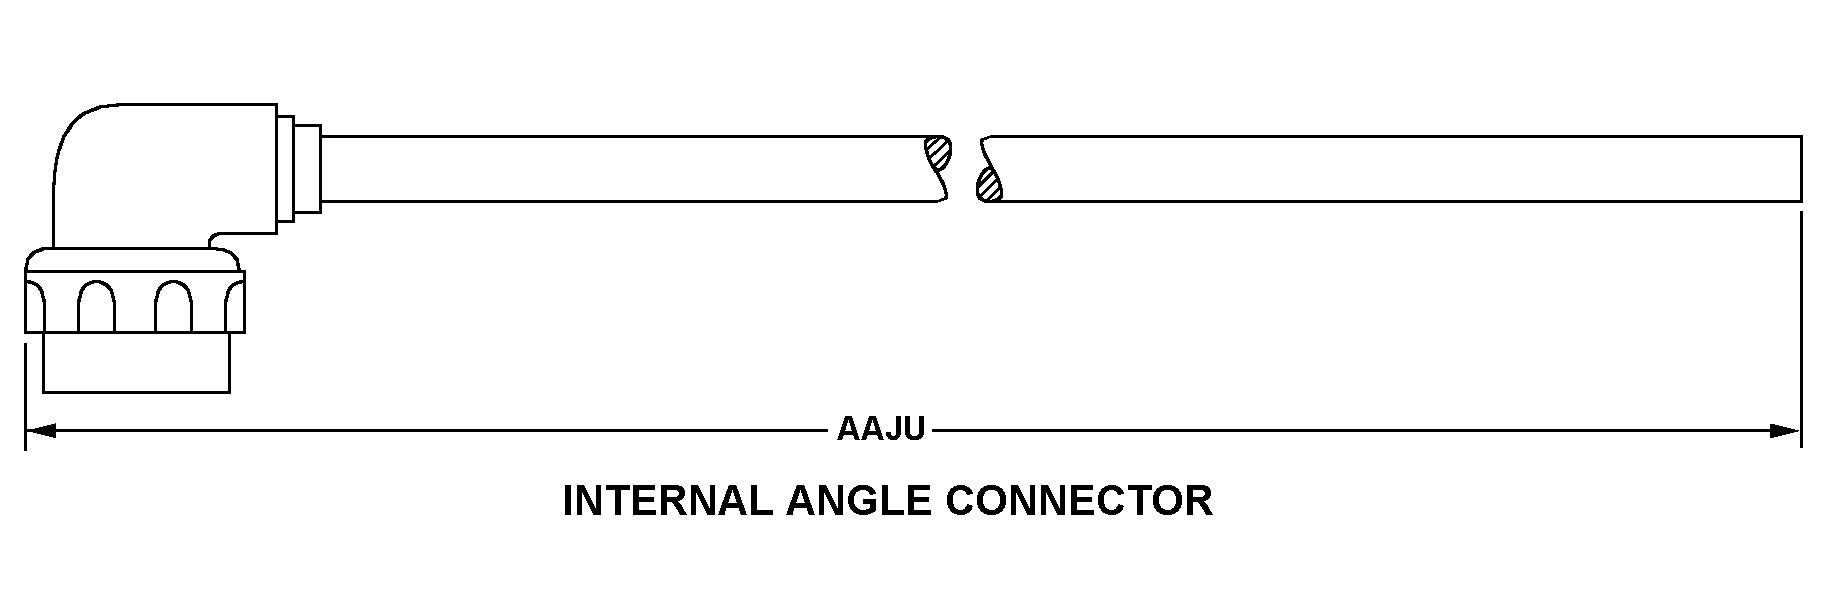 INTERNAL ANGLE CONNECTOR style nsn 6150-01-282-0271